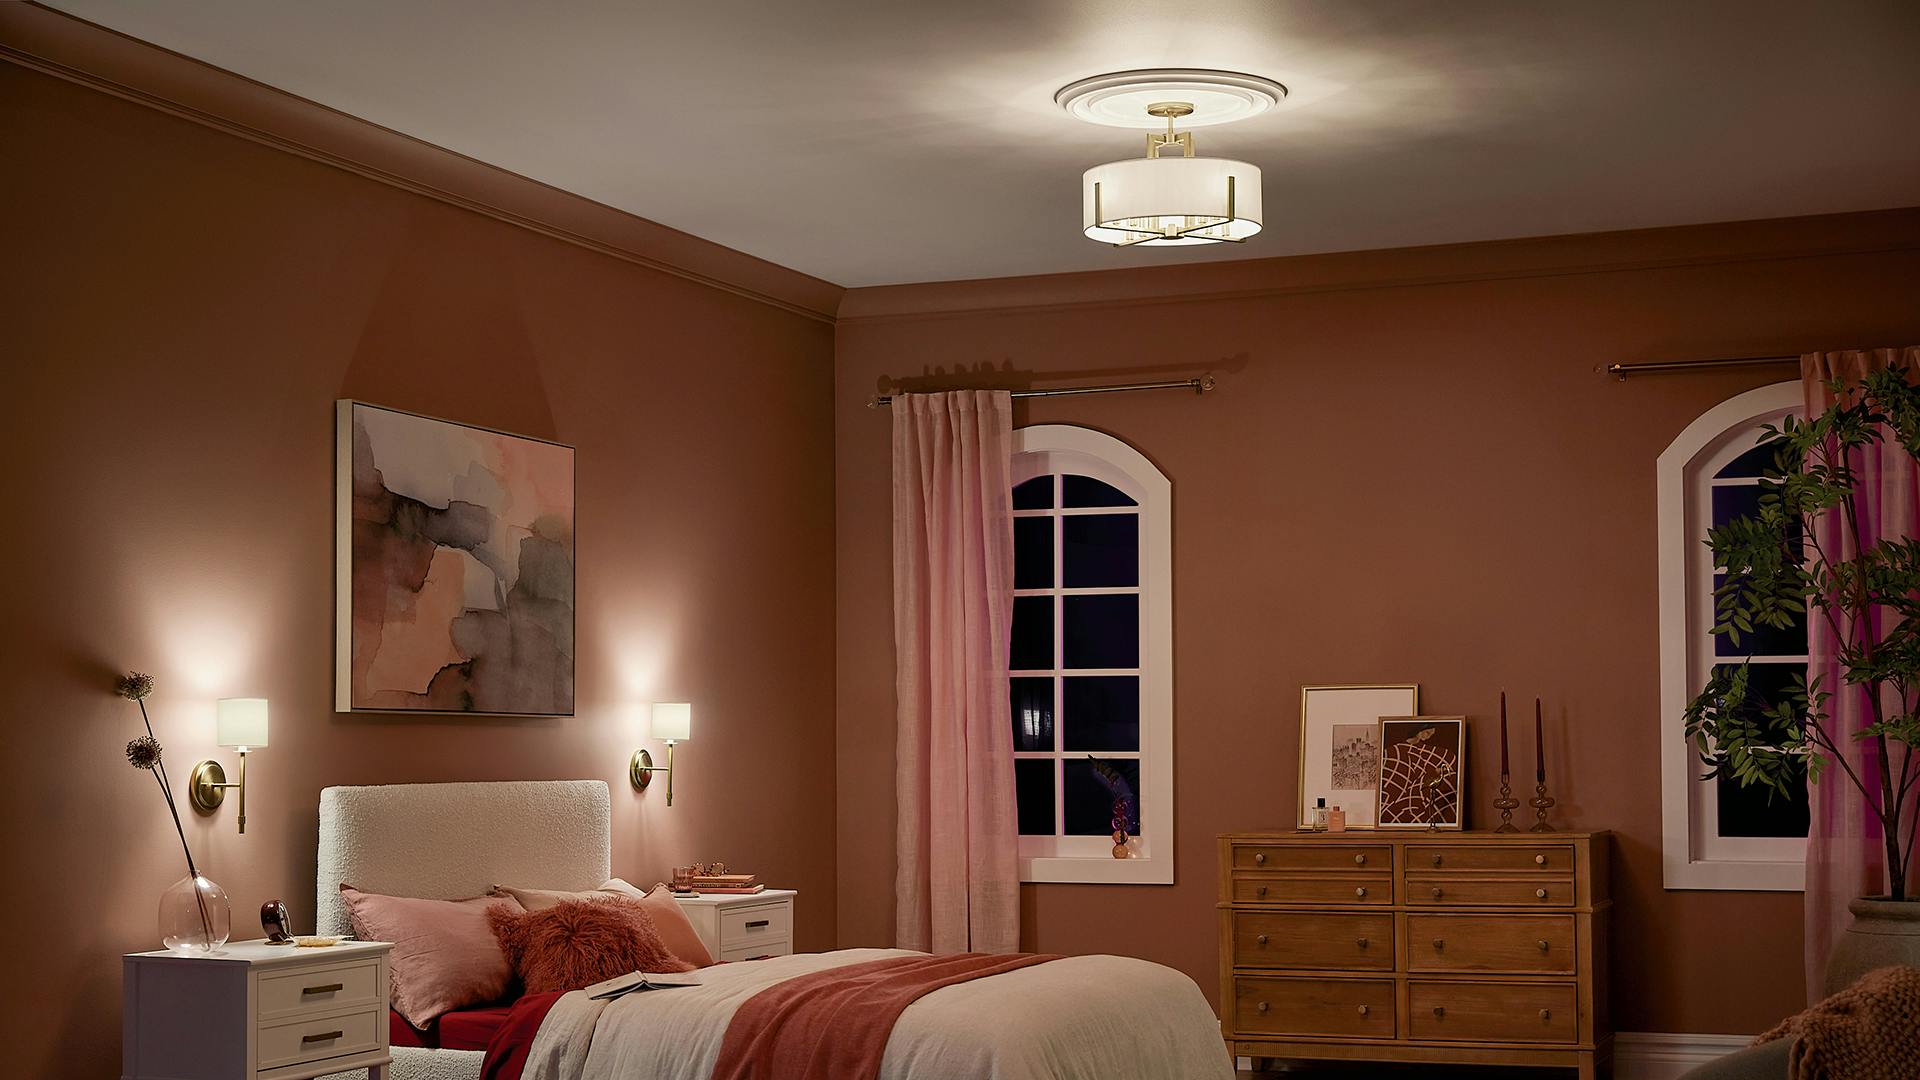 Bedroom at night with Pink accents and Malen Chandelier over the bed and Ali sconces on the side of the bed.